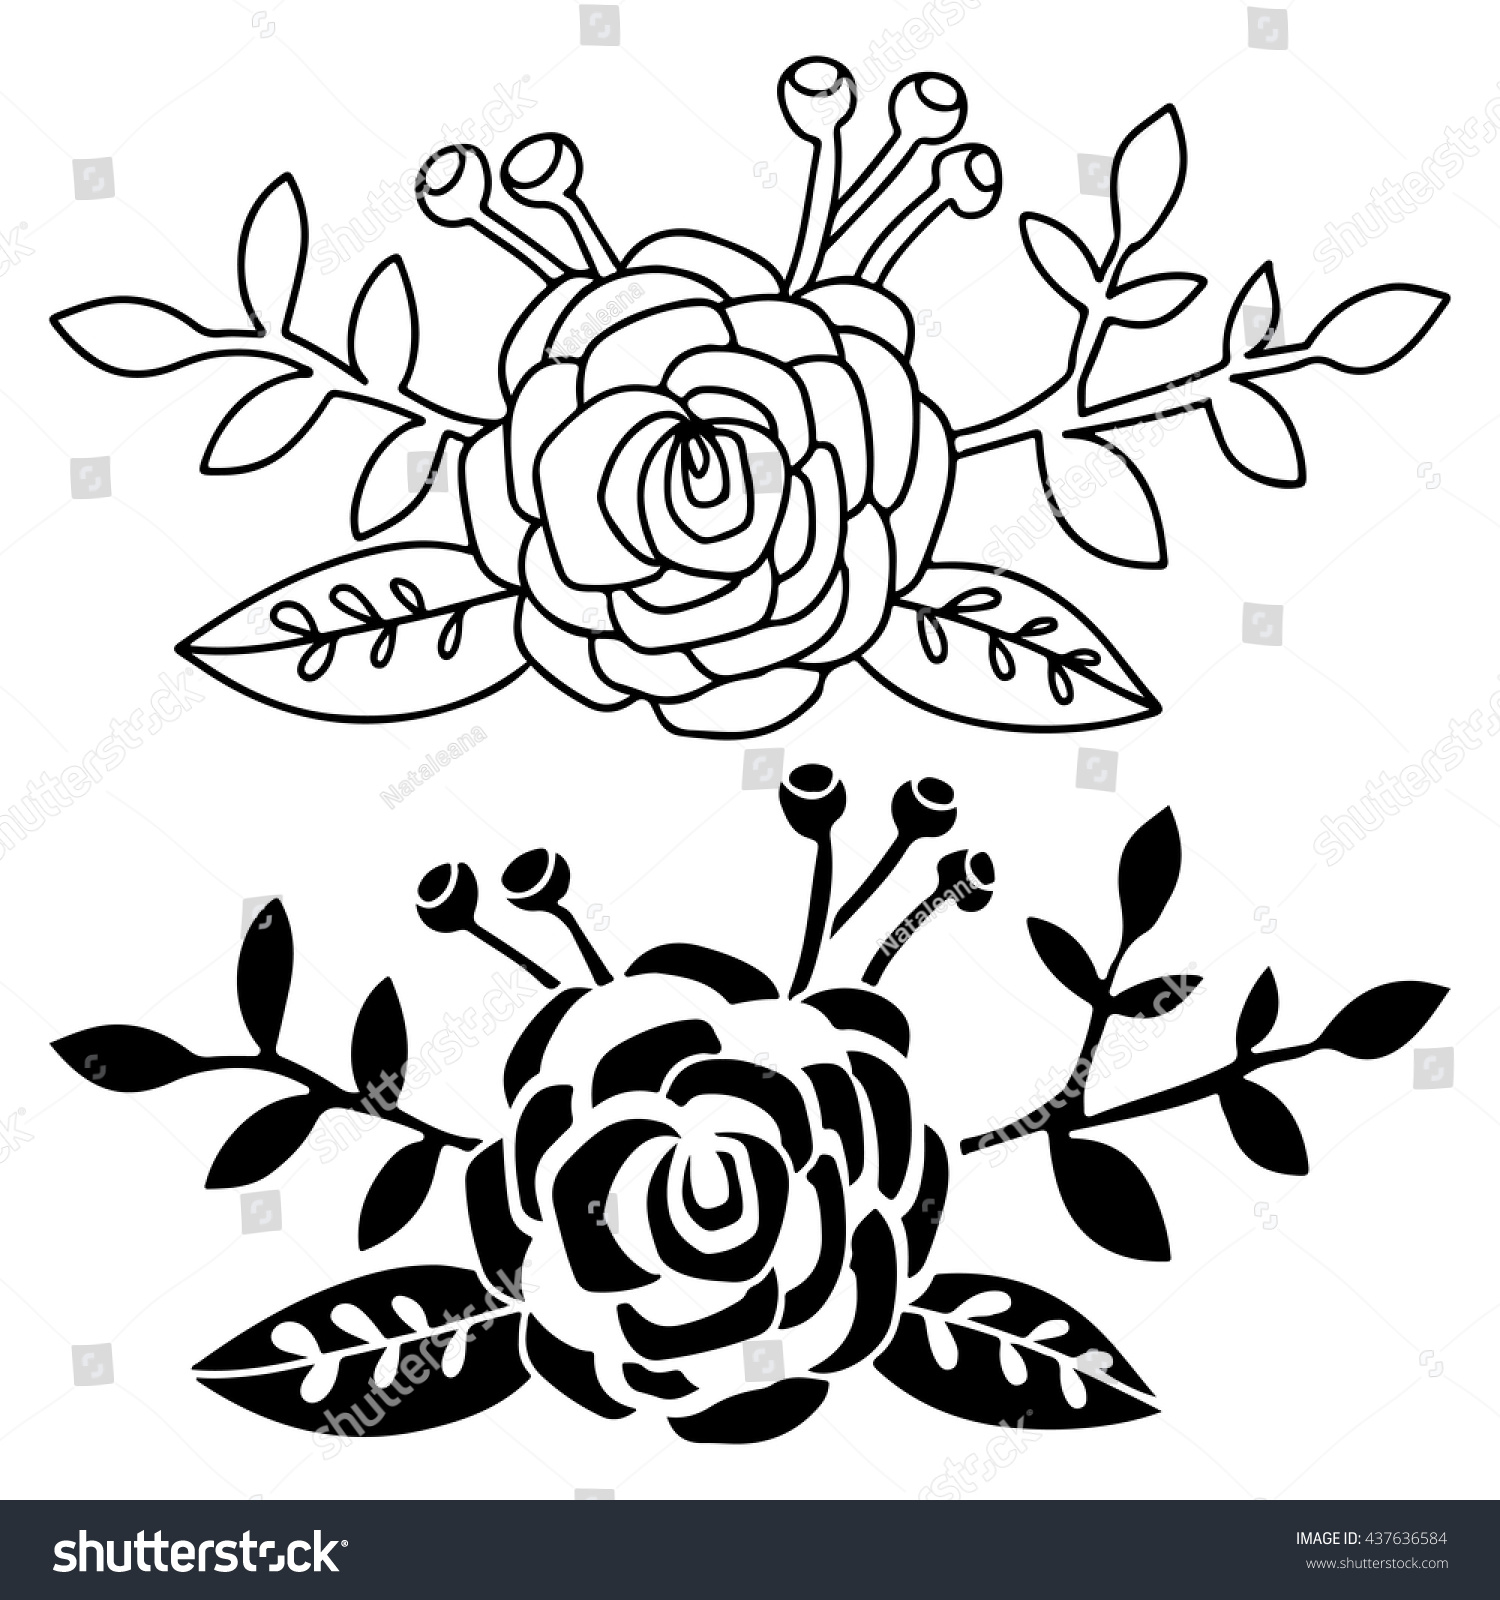 Bouquet Posy Flowers Leaves Branches Hand Stock Vector 437636584 ...